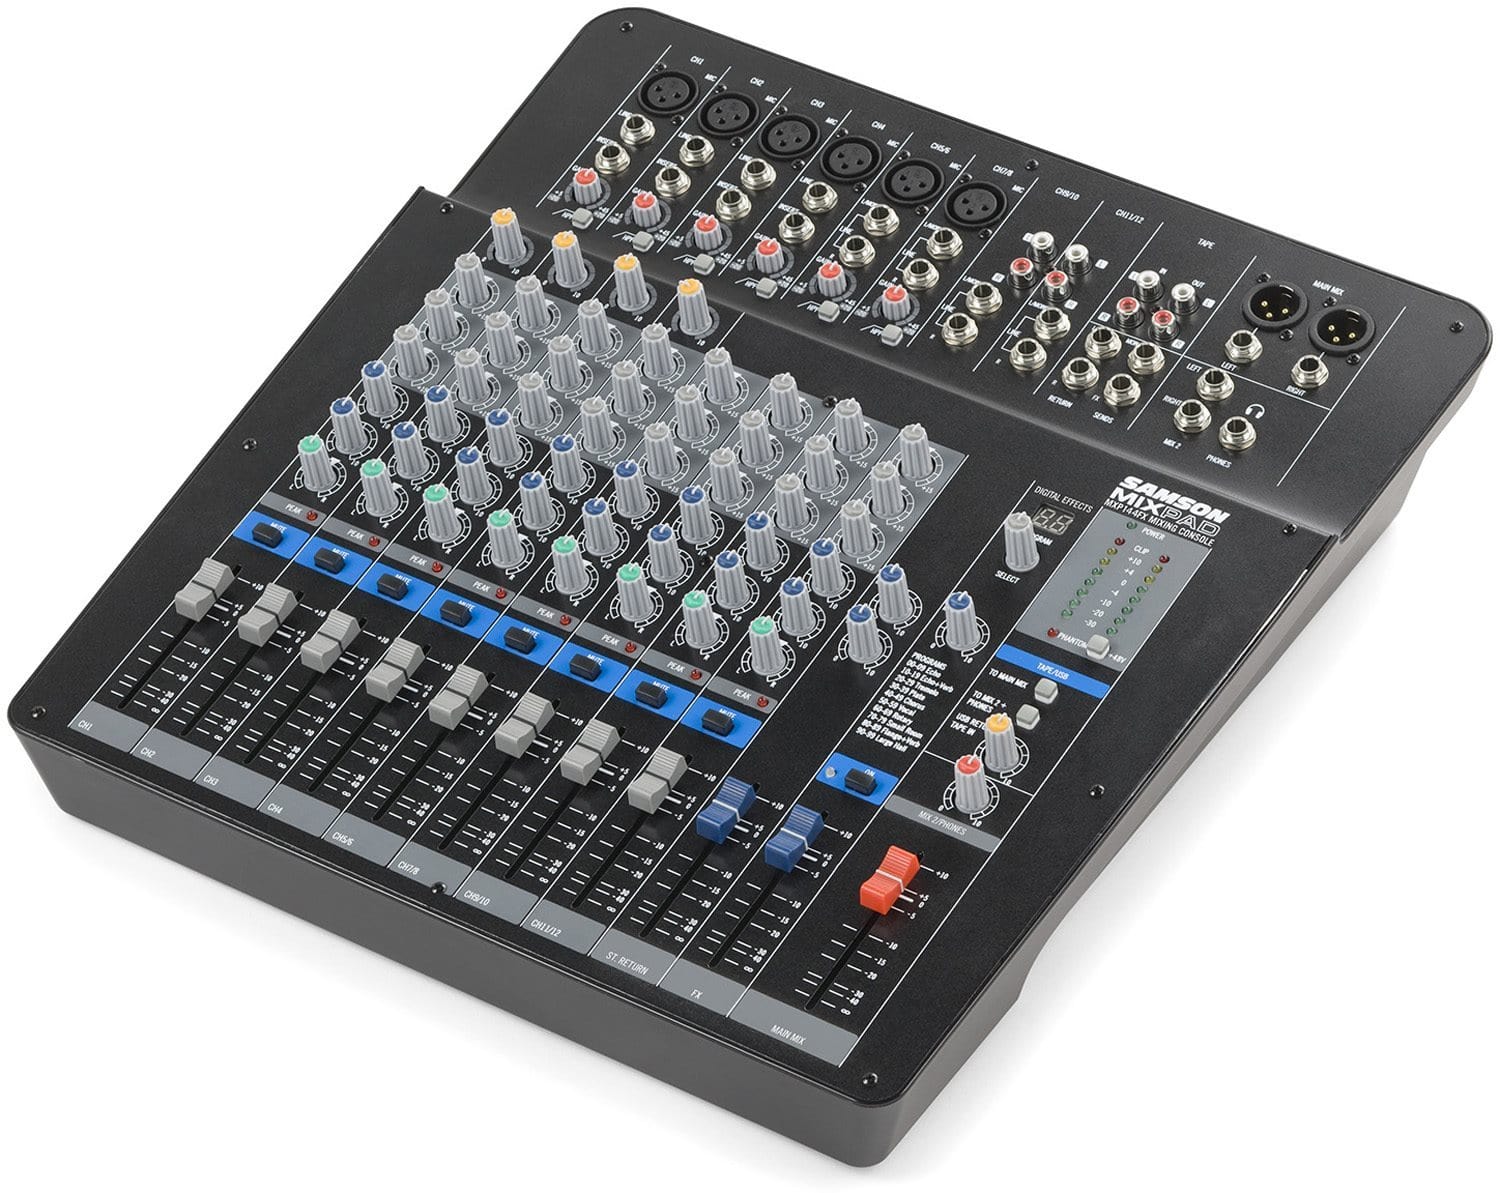 Samson MixPad MXP124FX 12-ch Mixer with Effects USB - PSSL ProSound and Stage Lighting